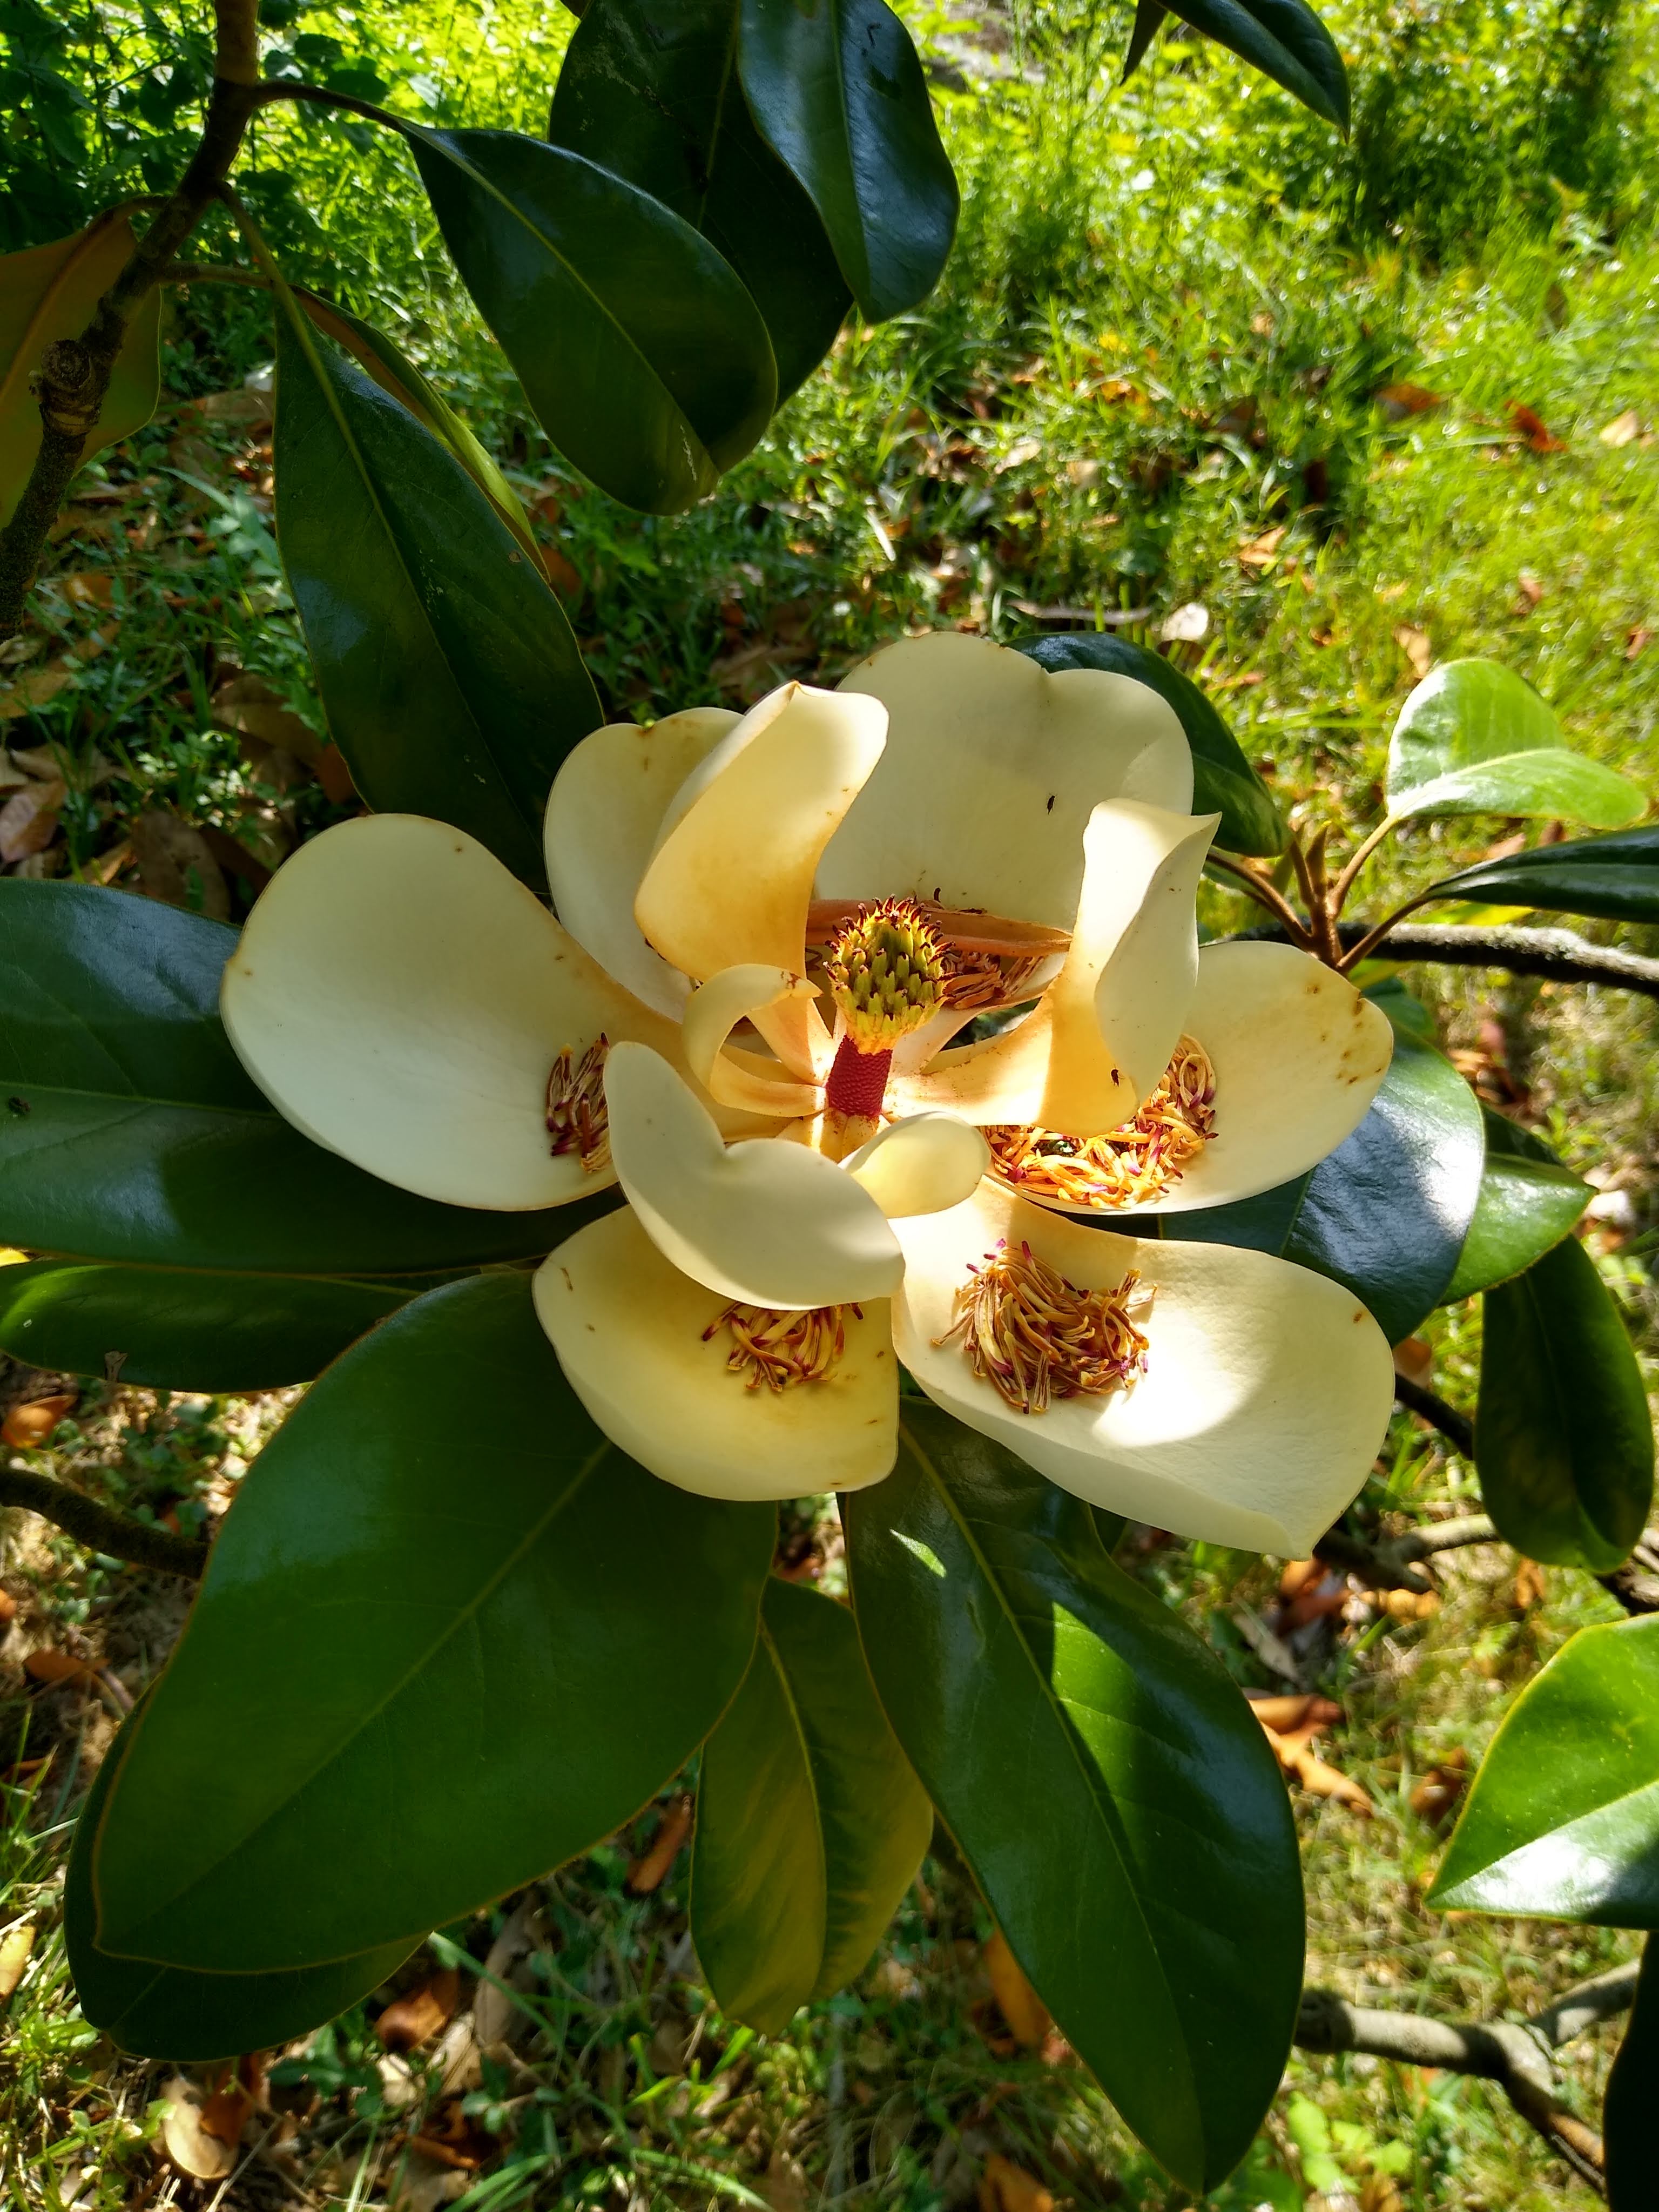 Magnolia flower and leaves